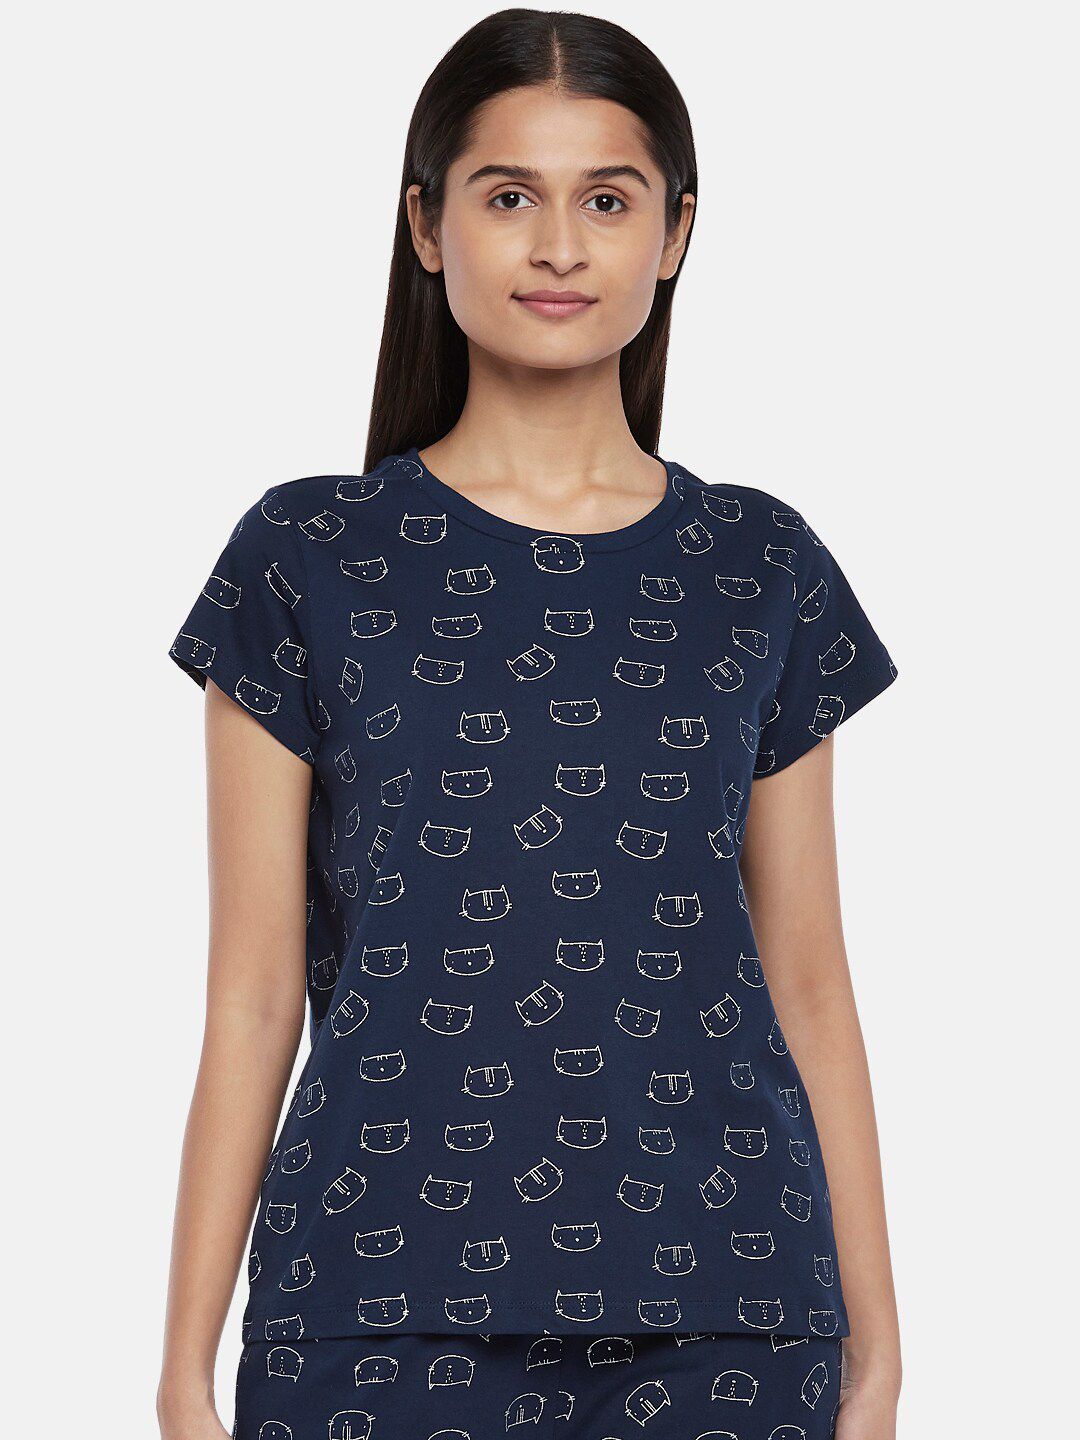 Dreamz by Pantaloons Navy Blue Floral Print Lounge tshirt Price in India